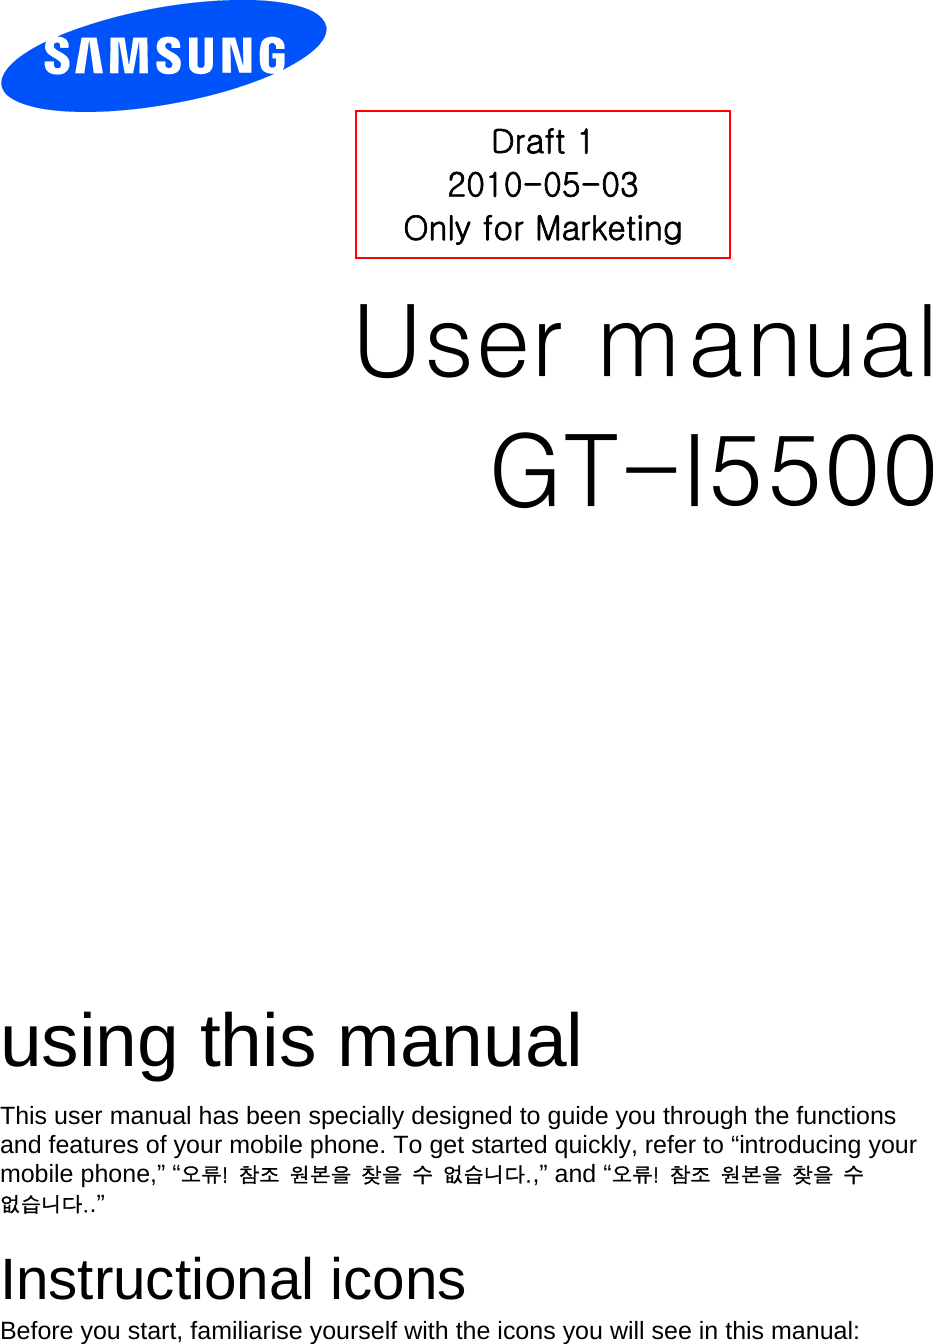          User manual GT-I5500                  using this manual This user manual has been specially designed to guide you through the functions and features of your mobile phone. To get started quickly, refer to “introducing your mobile phone,” “오류!  참조  원본을  찾을  수  없습니다.,” and “오류!  참조  원본을  찾을  수 없습니다..”  Instructional icons Before you start, familiarise yourself with the icons you will see in this manual:   Draft 1 2010-05-03 Only for Marketing 